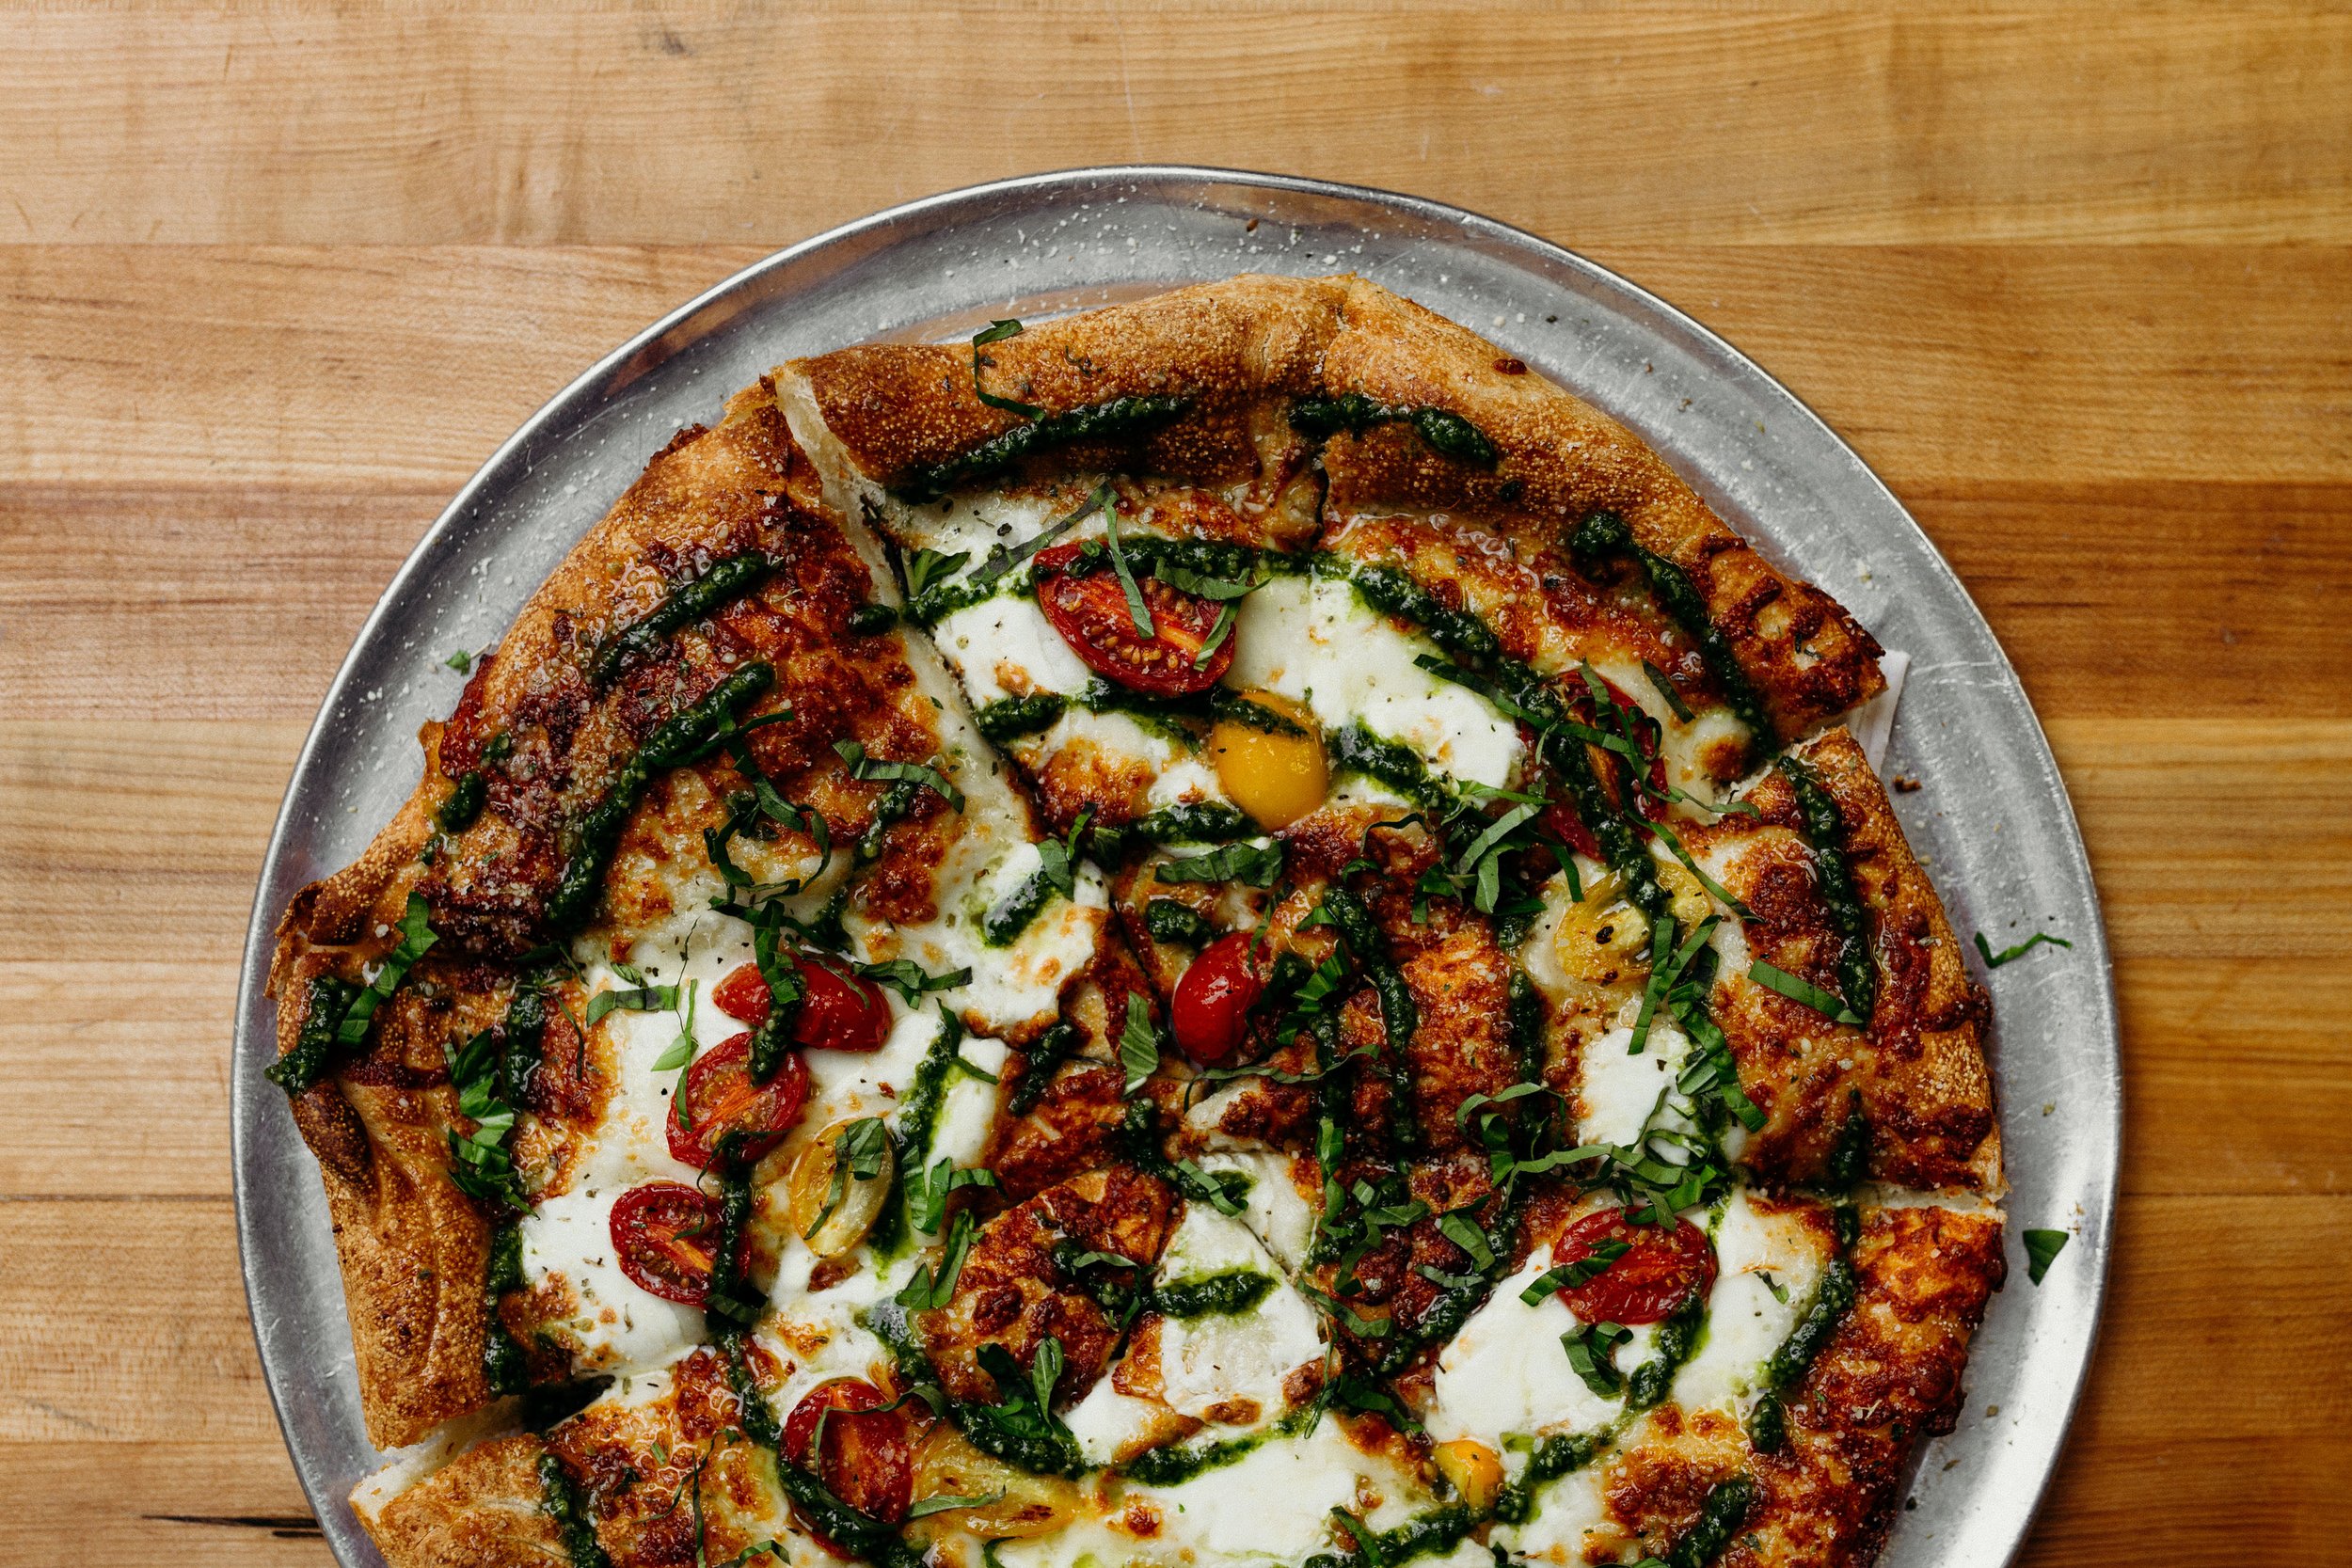 Introducing Your Favorite In-Home Pizzaiolo: You